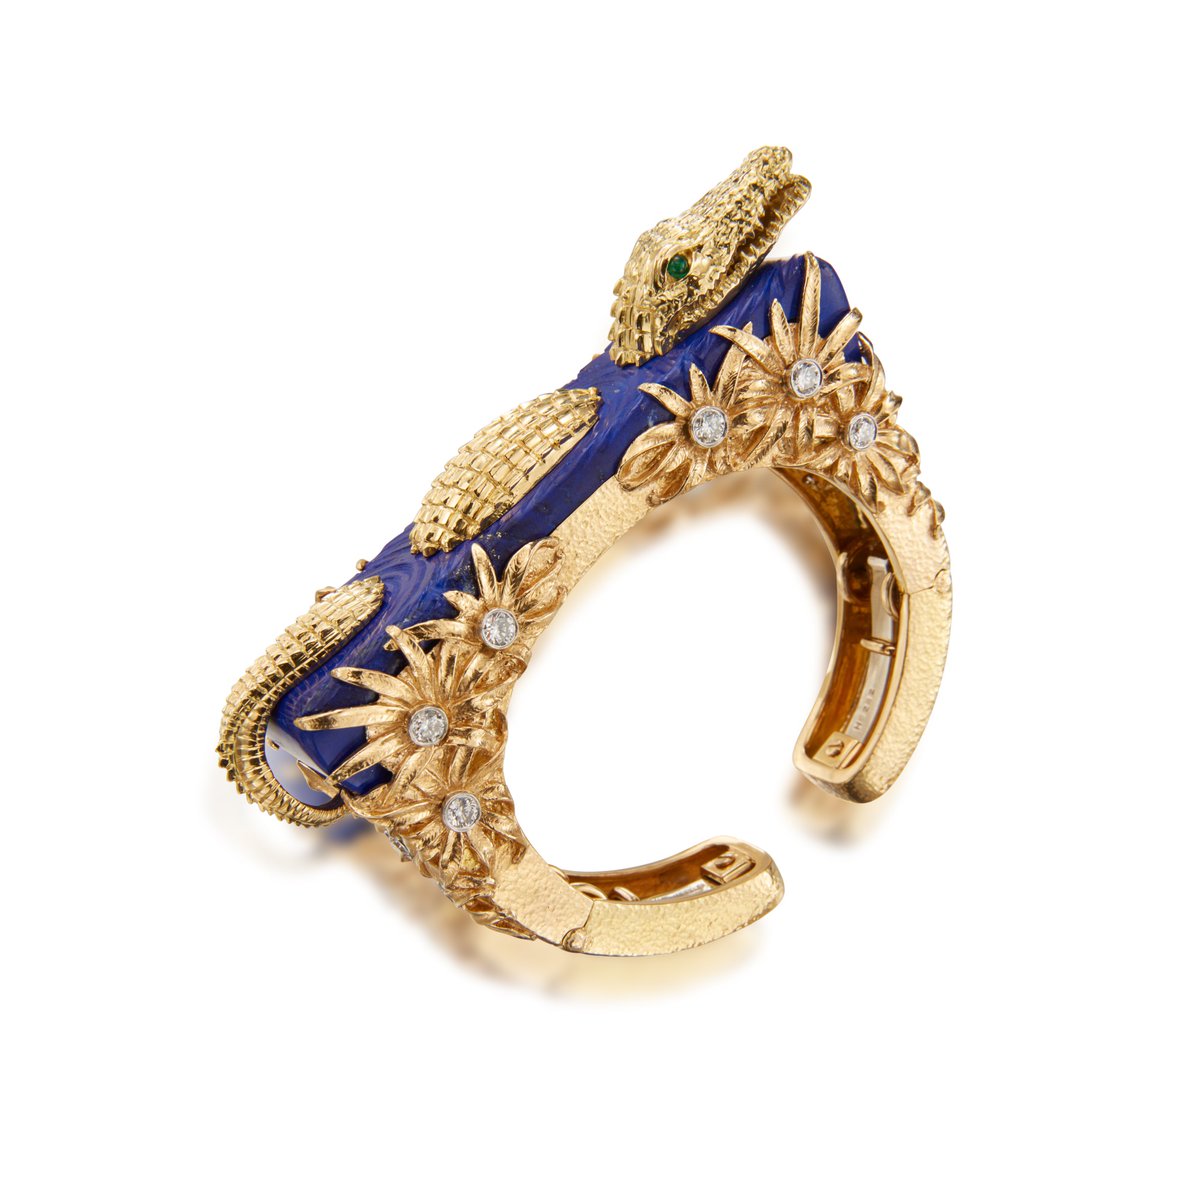 #AuctionUpdate Kicking off our Icons of Excellence & Haute Luxury auction in Vegas, this stunning David Webb 'Nile' cuff bracelet reaches $69,300. #SothebysxMGM